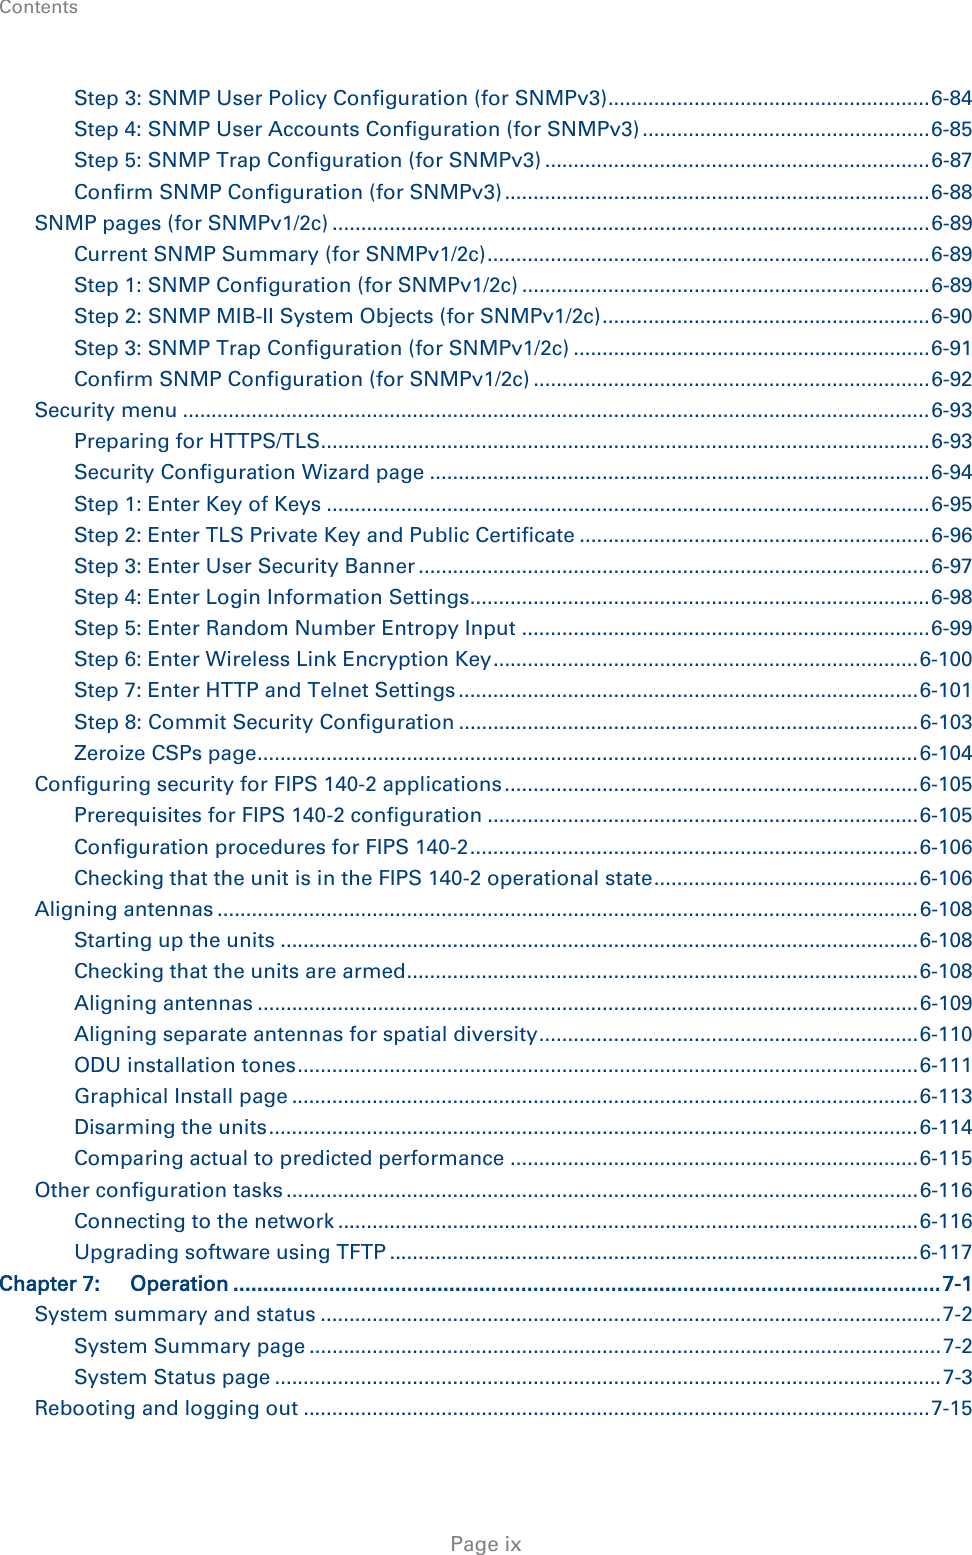 Contents    Step 3: SNMP User Policy Configuration (for SNMPv3) ........................................................ 6-84 Step 4: SNMP User Accounts Configuration (for SNMPv3) .................................................. 6-85 Step 5: SNMP Trap Configuration (for SNMPv3) ................................................................... 6-87 Confirm SNMP Configuration (for SNMPv3) .......................................................................... 6-88 SNMP pages (for SNMPv1/2c) ........................................................................................................ 6-89 Current SNMP Summary (for SNMPv1/2c) ............................................................................. 6-89 Step 1: SNMP Configuration (for SNMPv1/2c) ....................................................................... 6-89 Step 2: SNMP MIB-II System Objects (for SNMPv1/2c) ......................................................... 6-90 Step 3: SNMP Trap Configuration (for SNMPv1/2c) .............................................................. 6-91 Confirm SNMP Configuration (for SNMPv1/2c) ..................................................................... 6-92 Security menu .................................................................................................................................. 6-93 Preparing for HTTPS/TLS.......................................................................................................... 6-93 Security Configuration Wizard page ....................................................................................... 6-94 Step 1: Enter Key of Keys ......................................................................................................... 6-95 Step 2: Enter TLS Private Key and Public Certificate ............................................................. 6-96 Step 3: Enter User Security Banner ......................................................................................... 6-97 Step 4: Enter Login Information Settings................................................................................ 6-98 Step 5: Enter Random Number Entropy Input ....................................................................... 6-99 Step 6: Enter Wireless Link Encryption Key .......................................................................... 6-100 Step 7: Enter HTTP and Telnet Settings ................................................................................ 6-101 Step 8: Commit Security Configuration ................................................................................ 6-103 Zeroize CSPs page ................................................................................................................... 6-104 Configuring security for FIPS 140-2 applications ........................................................................ 6-105 Prerequisites for FIPS 140-2 configuration ........................................................................... 6-105 Configuration procedures for FIPS 140-2 .............................................................................. 6-106 Checking that the unit is in the FIPS 140-2 operational state .............................................. 6-106 Aligning antennas .......................................................................................................................... 6-108 Starting up the units ............................................................................................................... 6-108 Checking that the units are armed ......................................................................................... 6-108 Aligning antennas ................................................................................................................... 6-109 Aligning separate antennas for spatial diversity .................................................................. 6-110 ODU installation tones ............................................................................................................ 6-111 Graphical Install page ............................................................................................................. 6-113 Disarming the units ................................................................................................................. 6-114 Comparing actual to predicted performance ....................................................................... 6-115 Other configuration tasks .............................................................................................................. 6-116 Connecting to the network ..................................................................................................... 6-116 Upgrading software using TFTP ............................................................................................ 6-117 Chapter 7: Operation ...................................................................................................................... 7-1 System summary and status ............................................................................................................ 7-2 System Summary page .............................................................................................................. 7-2 System Status page .................................................................................................................... 7-3 Rebooting and logging out ............................................................................................................. 7-15  Page ix 